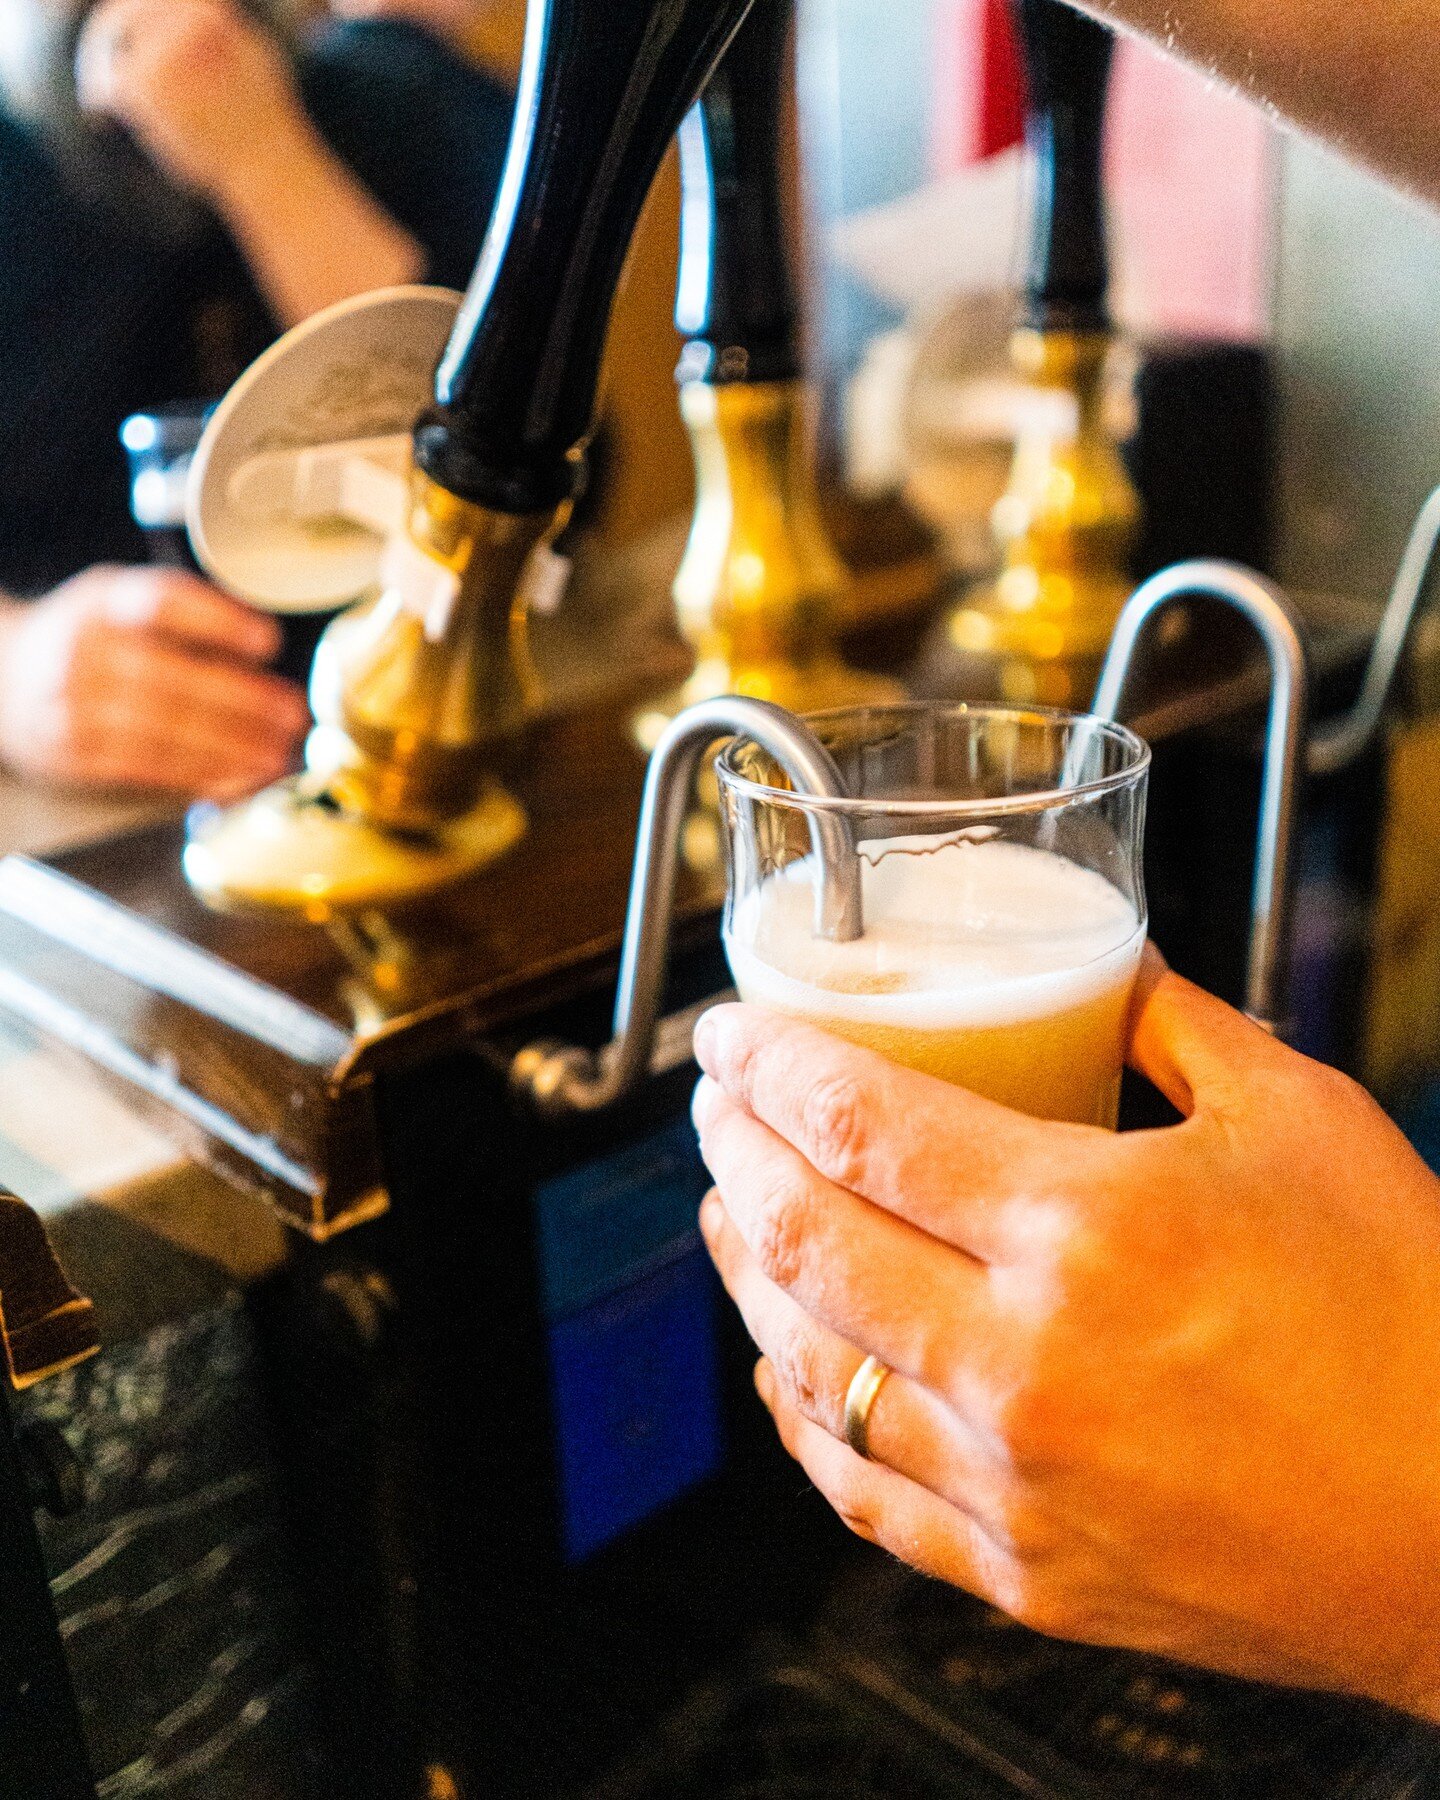 ⁠Fancy a pint? 🍺 Taproom is open today at noon and serving up your favorite beer. 🍻 See below for what's currently on tap and let us know what you'll be ordering the next time you stop in.⁠
⬇️⁠
CASK ALE:⁠
1898 IPA | Historical English IPA⁠
The King